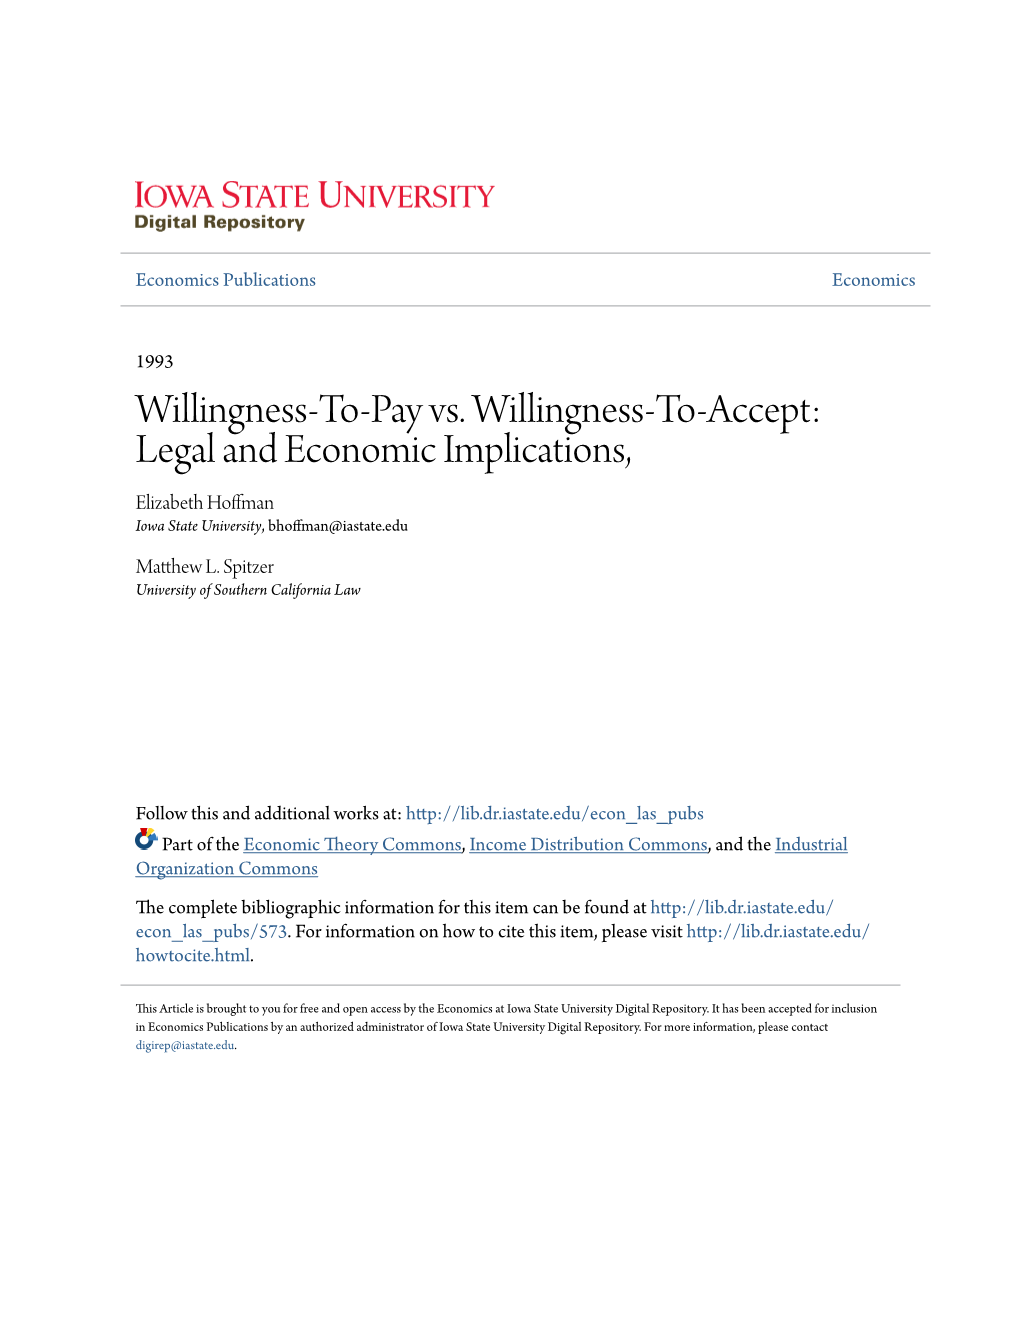 Willingness-To-Pay Vs. Willingness-To-Accept: Legal and Economic Implications, Elizabeth Hoffman Iowa State University, Bhoffman@Iastate.Edu